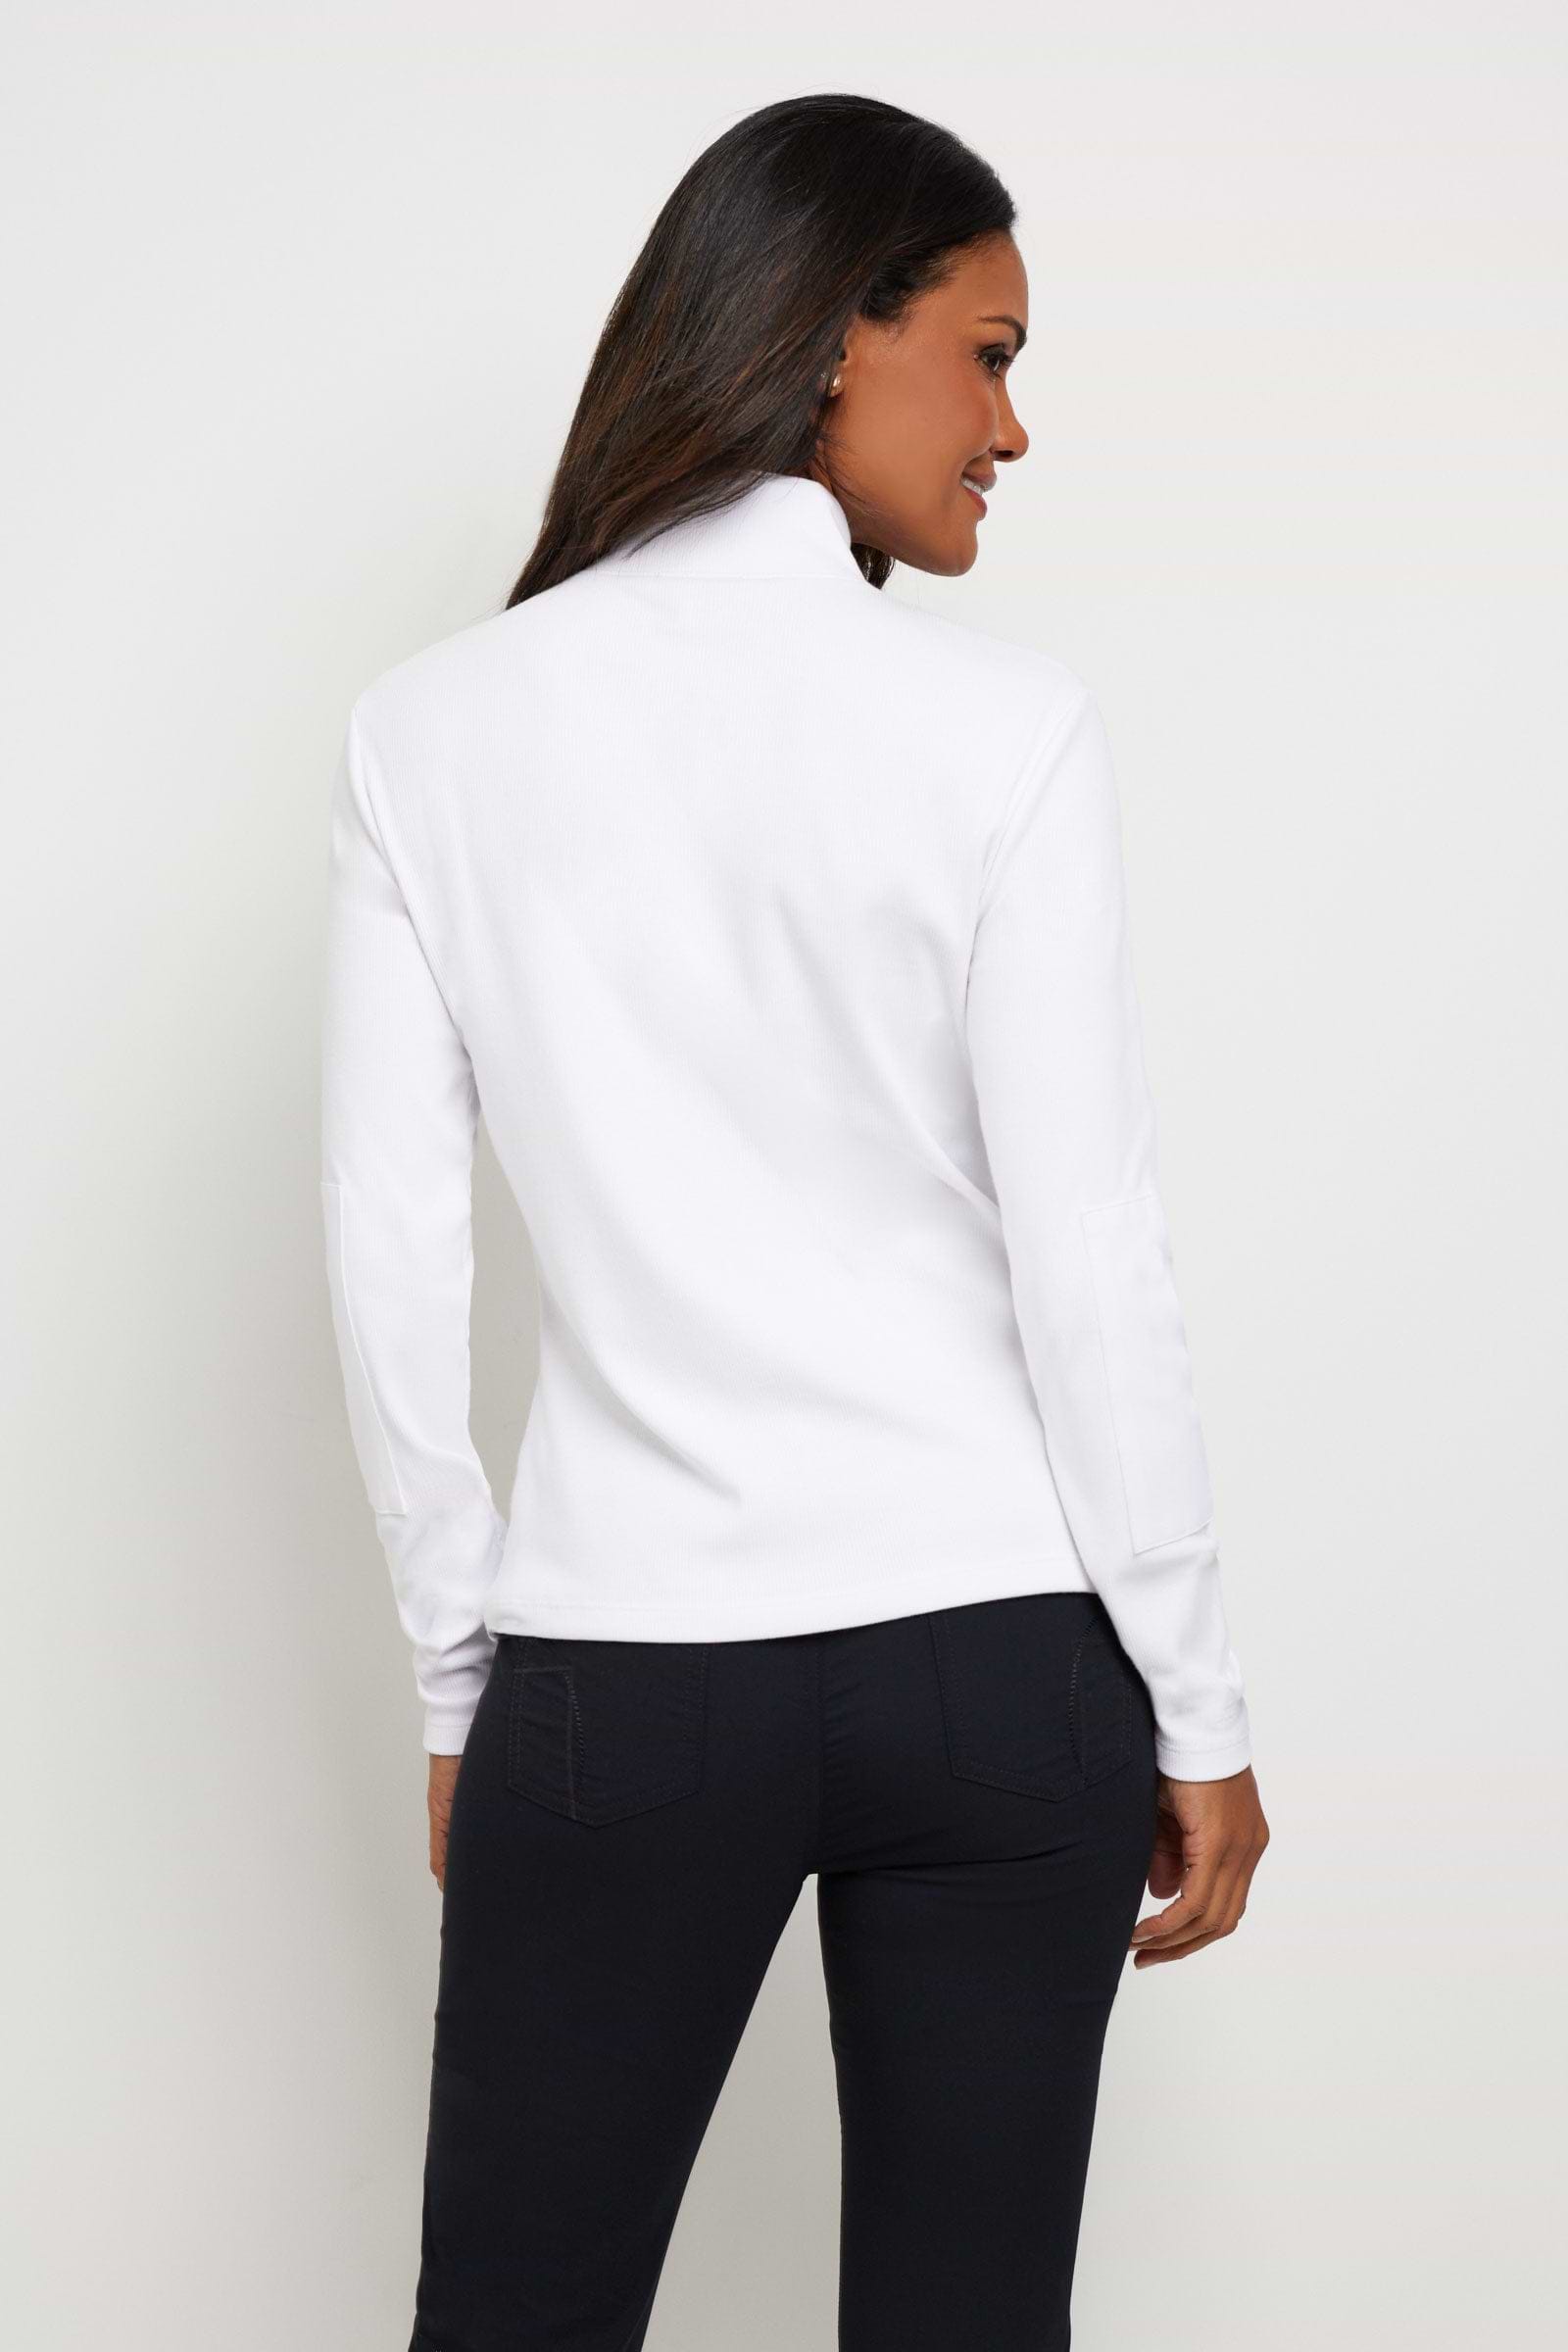 The Best Travel Top. Woman Showing the Back Profile of a Monroe Henley Top in White.